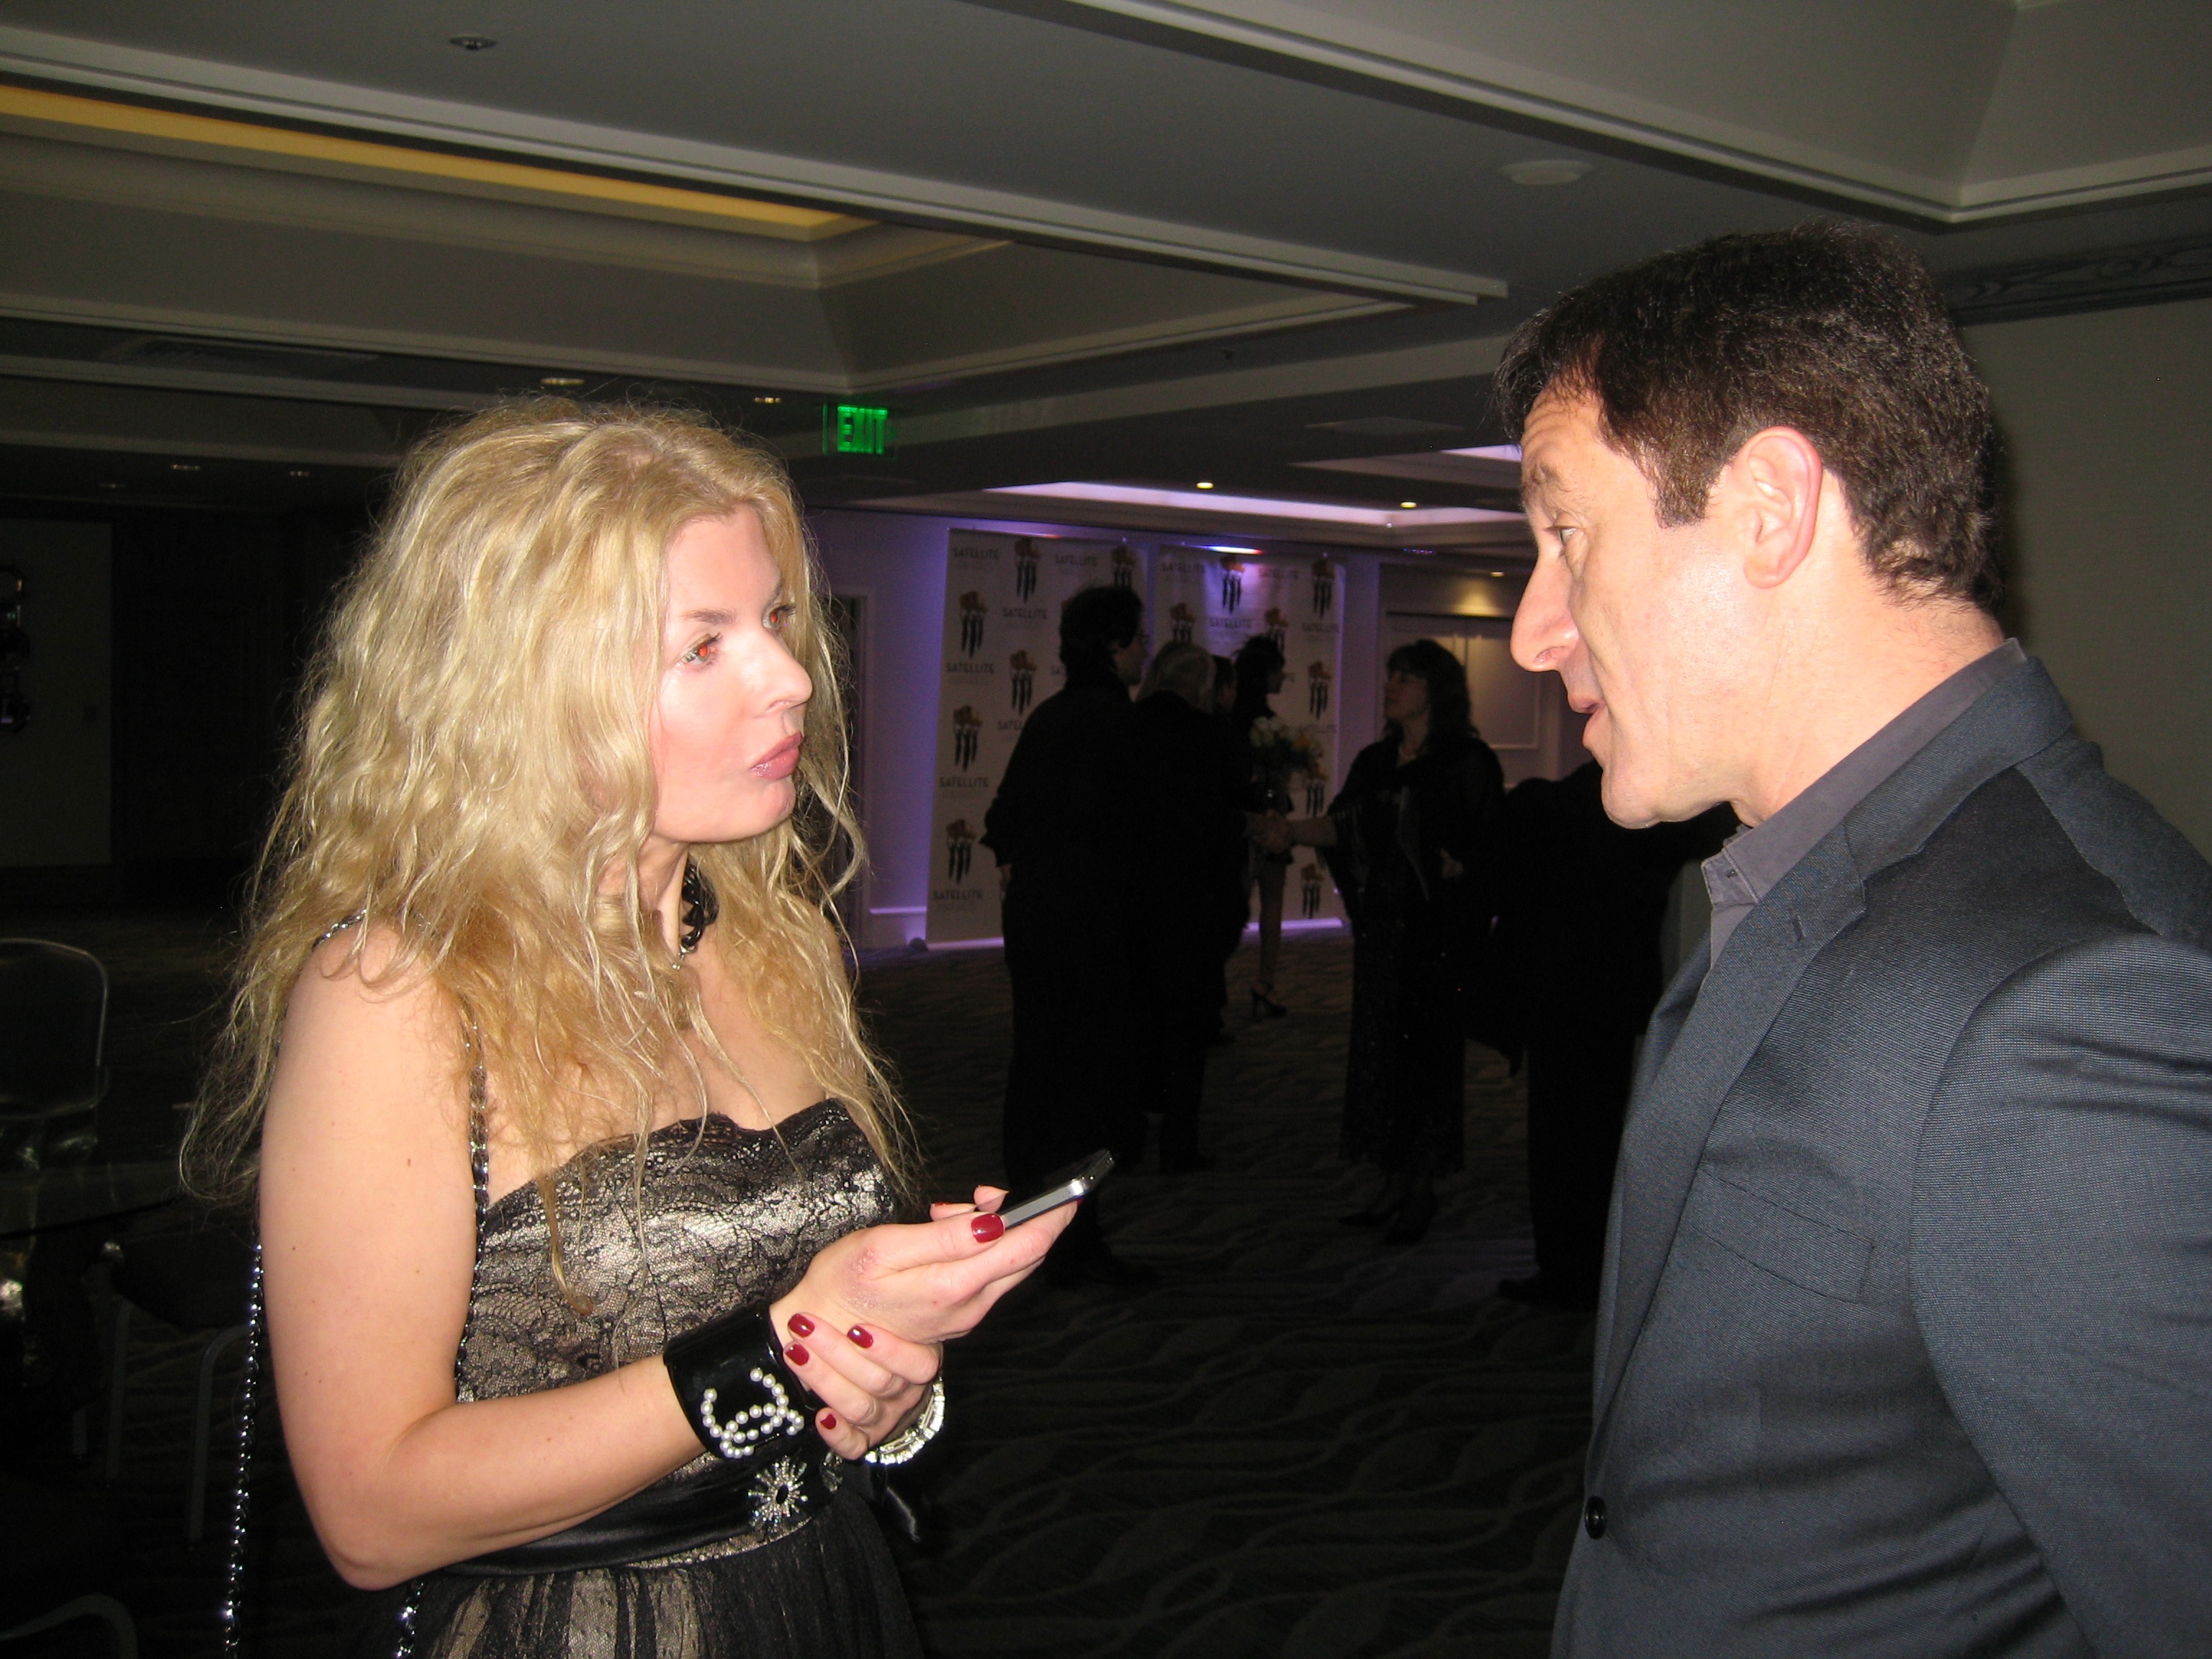 Adrienne Papp of Atlantic Publicity Interviewing Jason Isaacs at the 2012 International Press Academy Satellite Awards, December 2012, Los Angeles